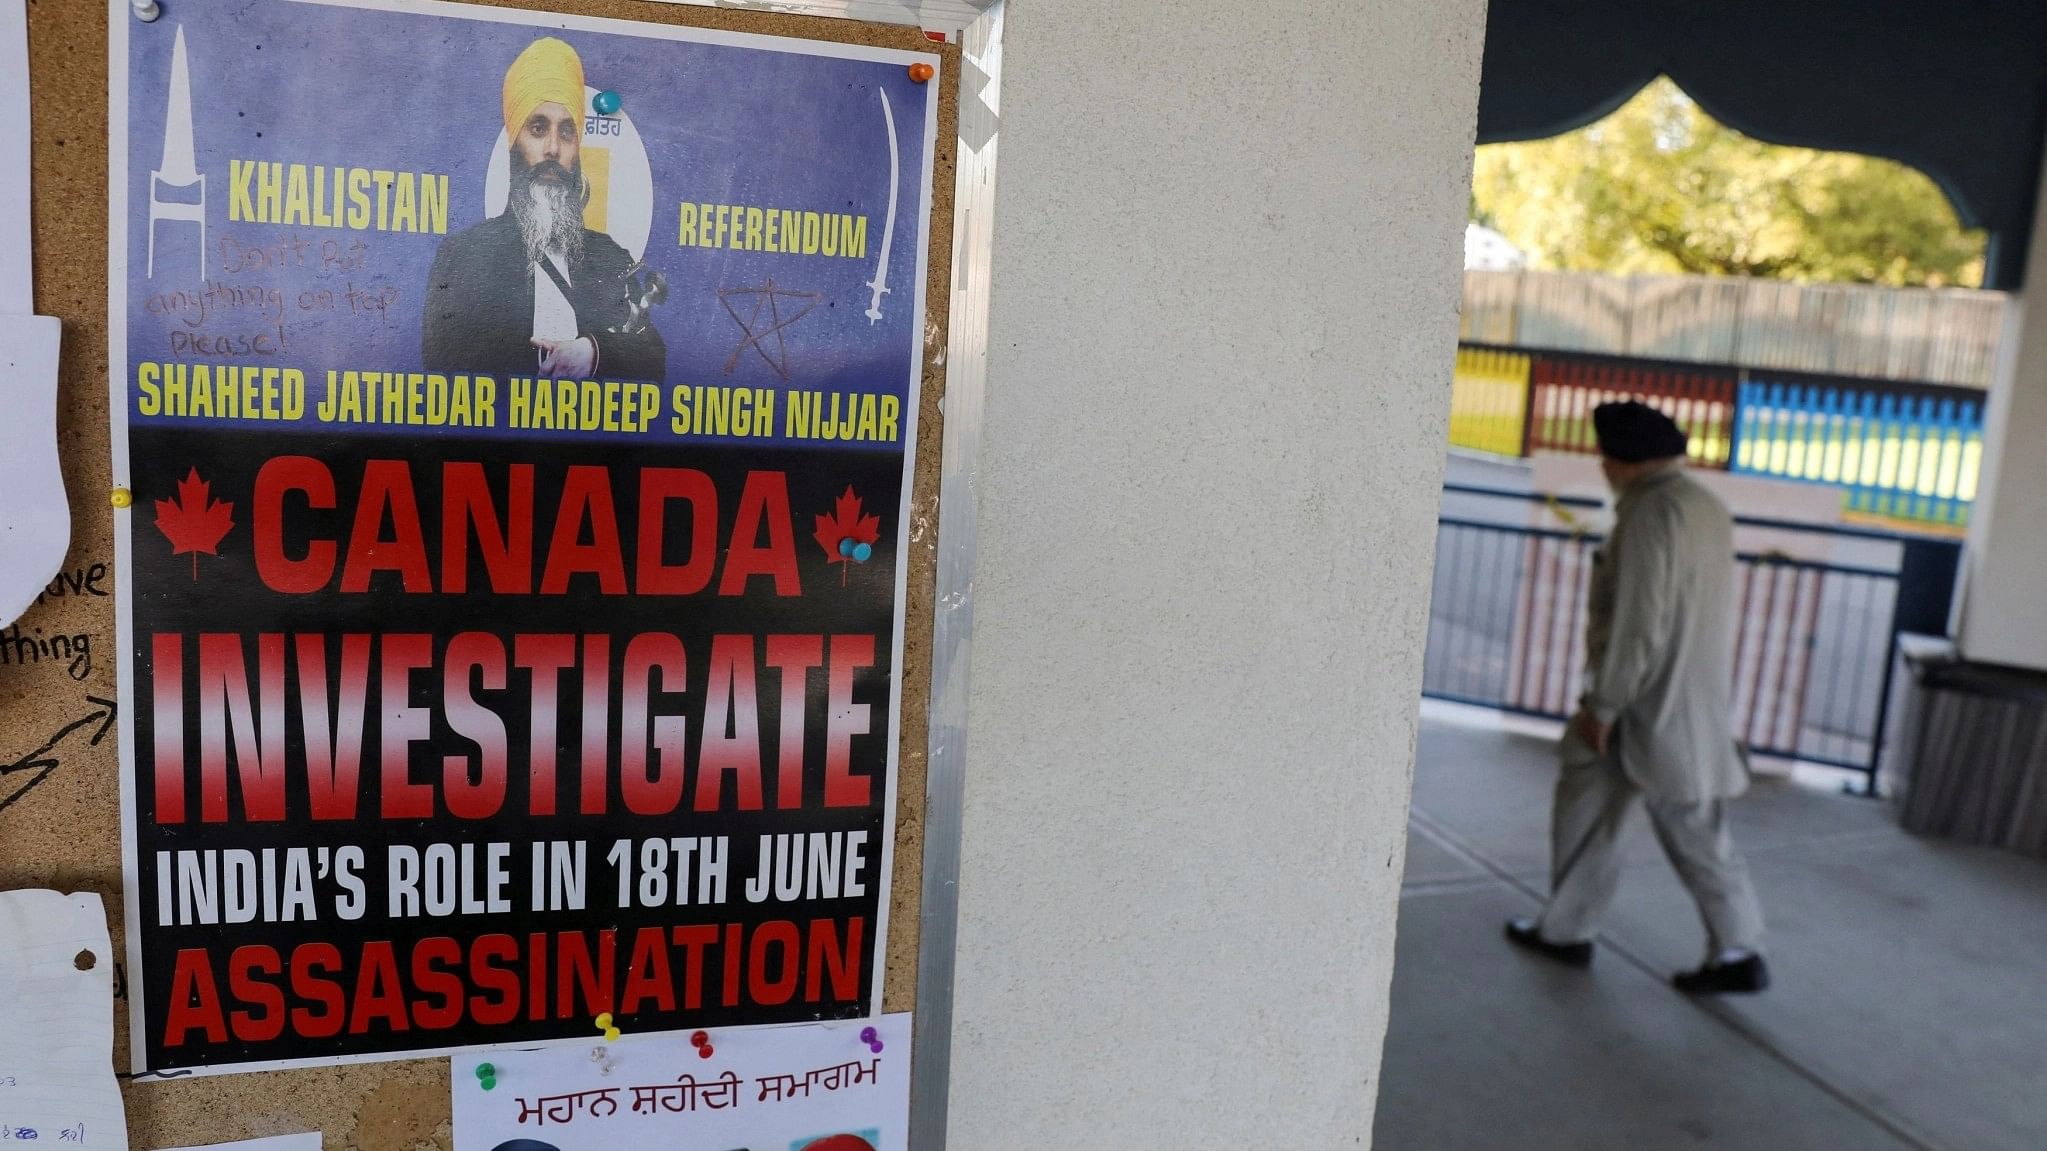 <div class="paragraphs"><p>A sign asking for an investigation on India's role in the killing of Sikh separatist Hardeep Singh Nijjar is seen at the Guru Nanak Sikh Gurdwara temple, in Surrey, British Columbia, Canada.</p></div>